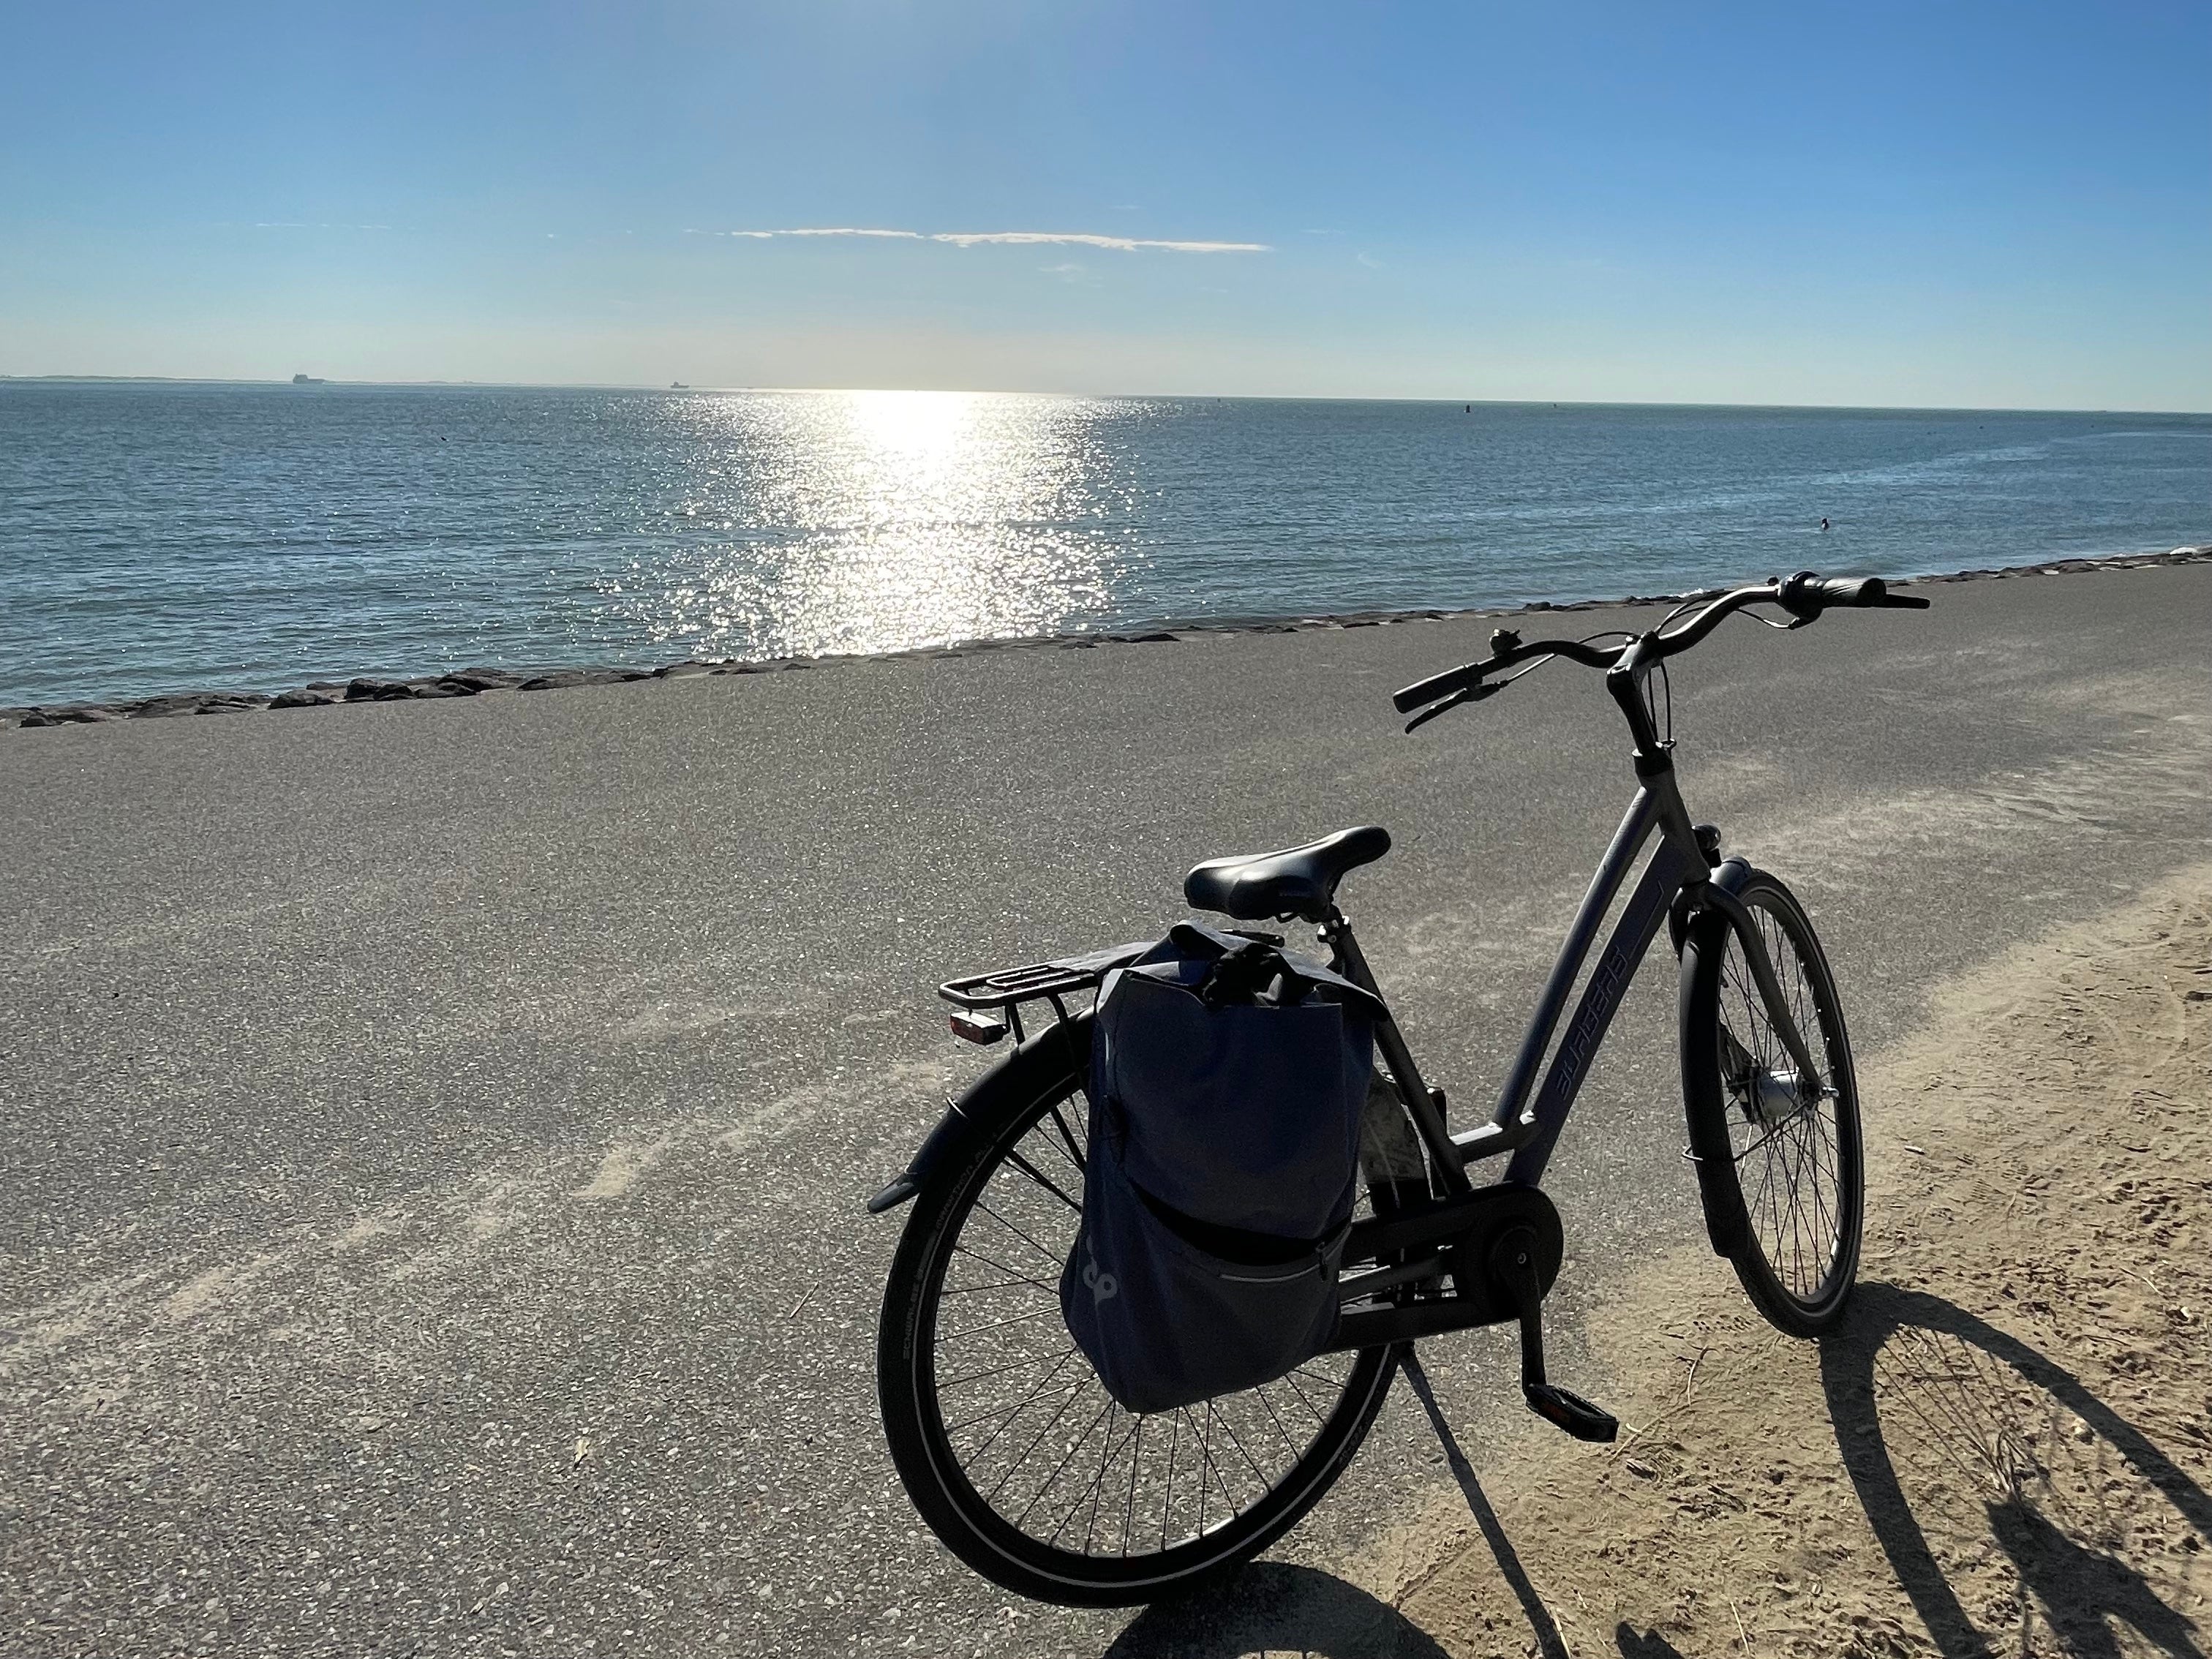 <p>Solo cycling: Jini takes in the view from Westduin beach, Vlissingen</p>